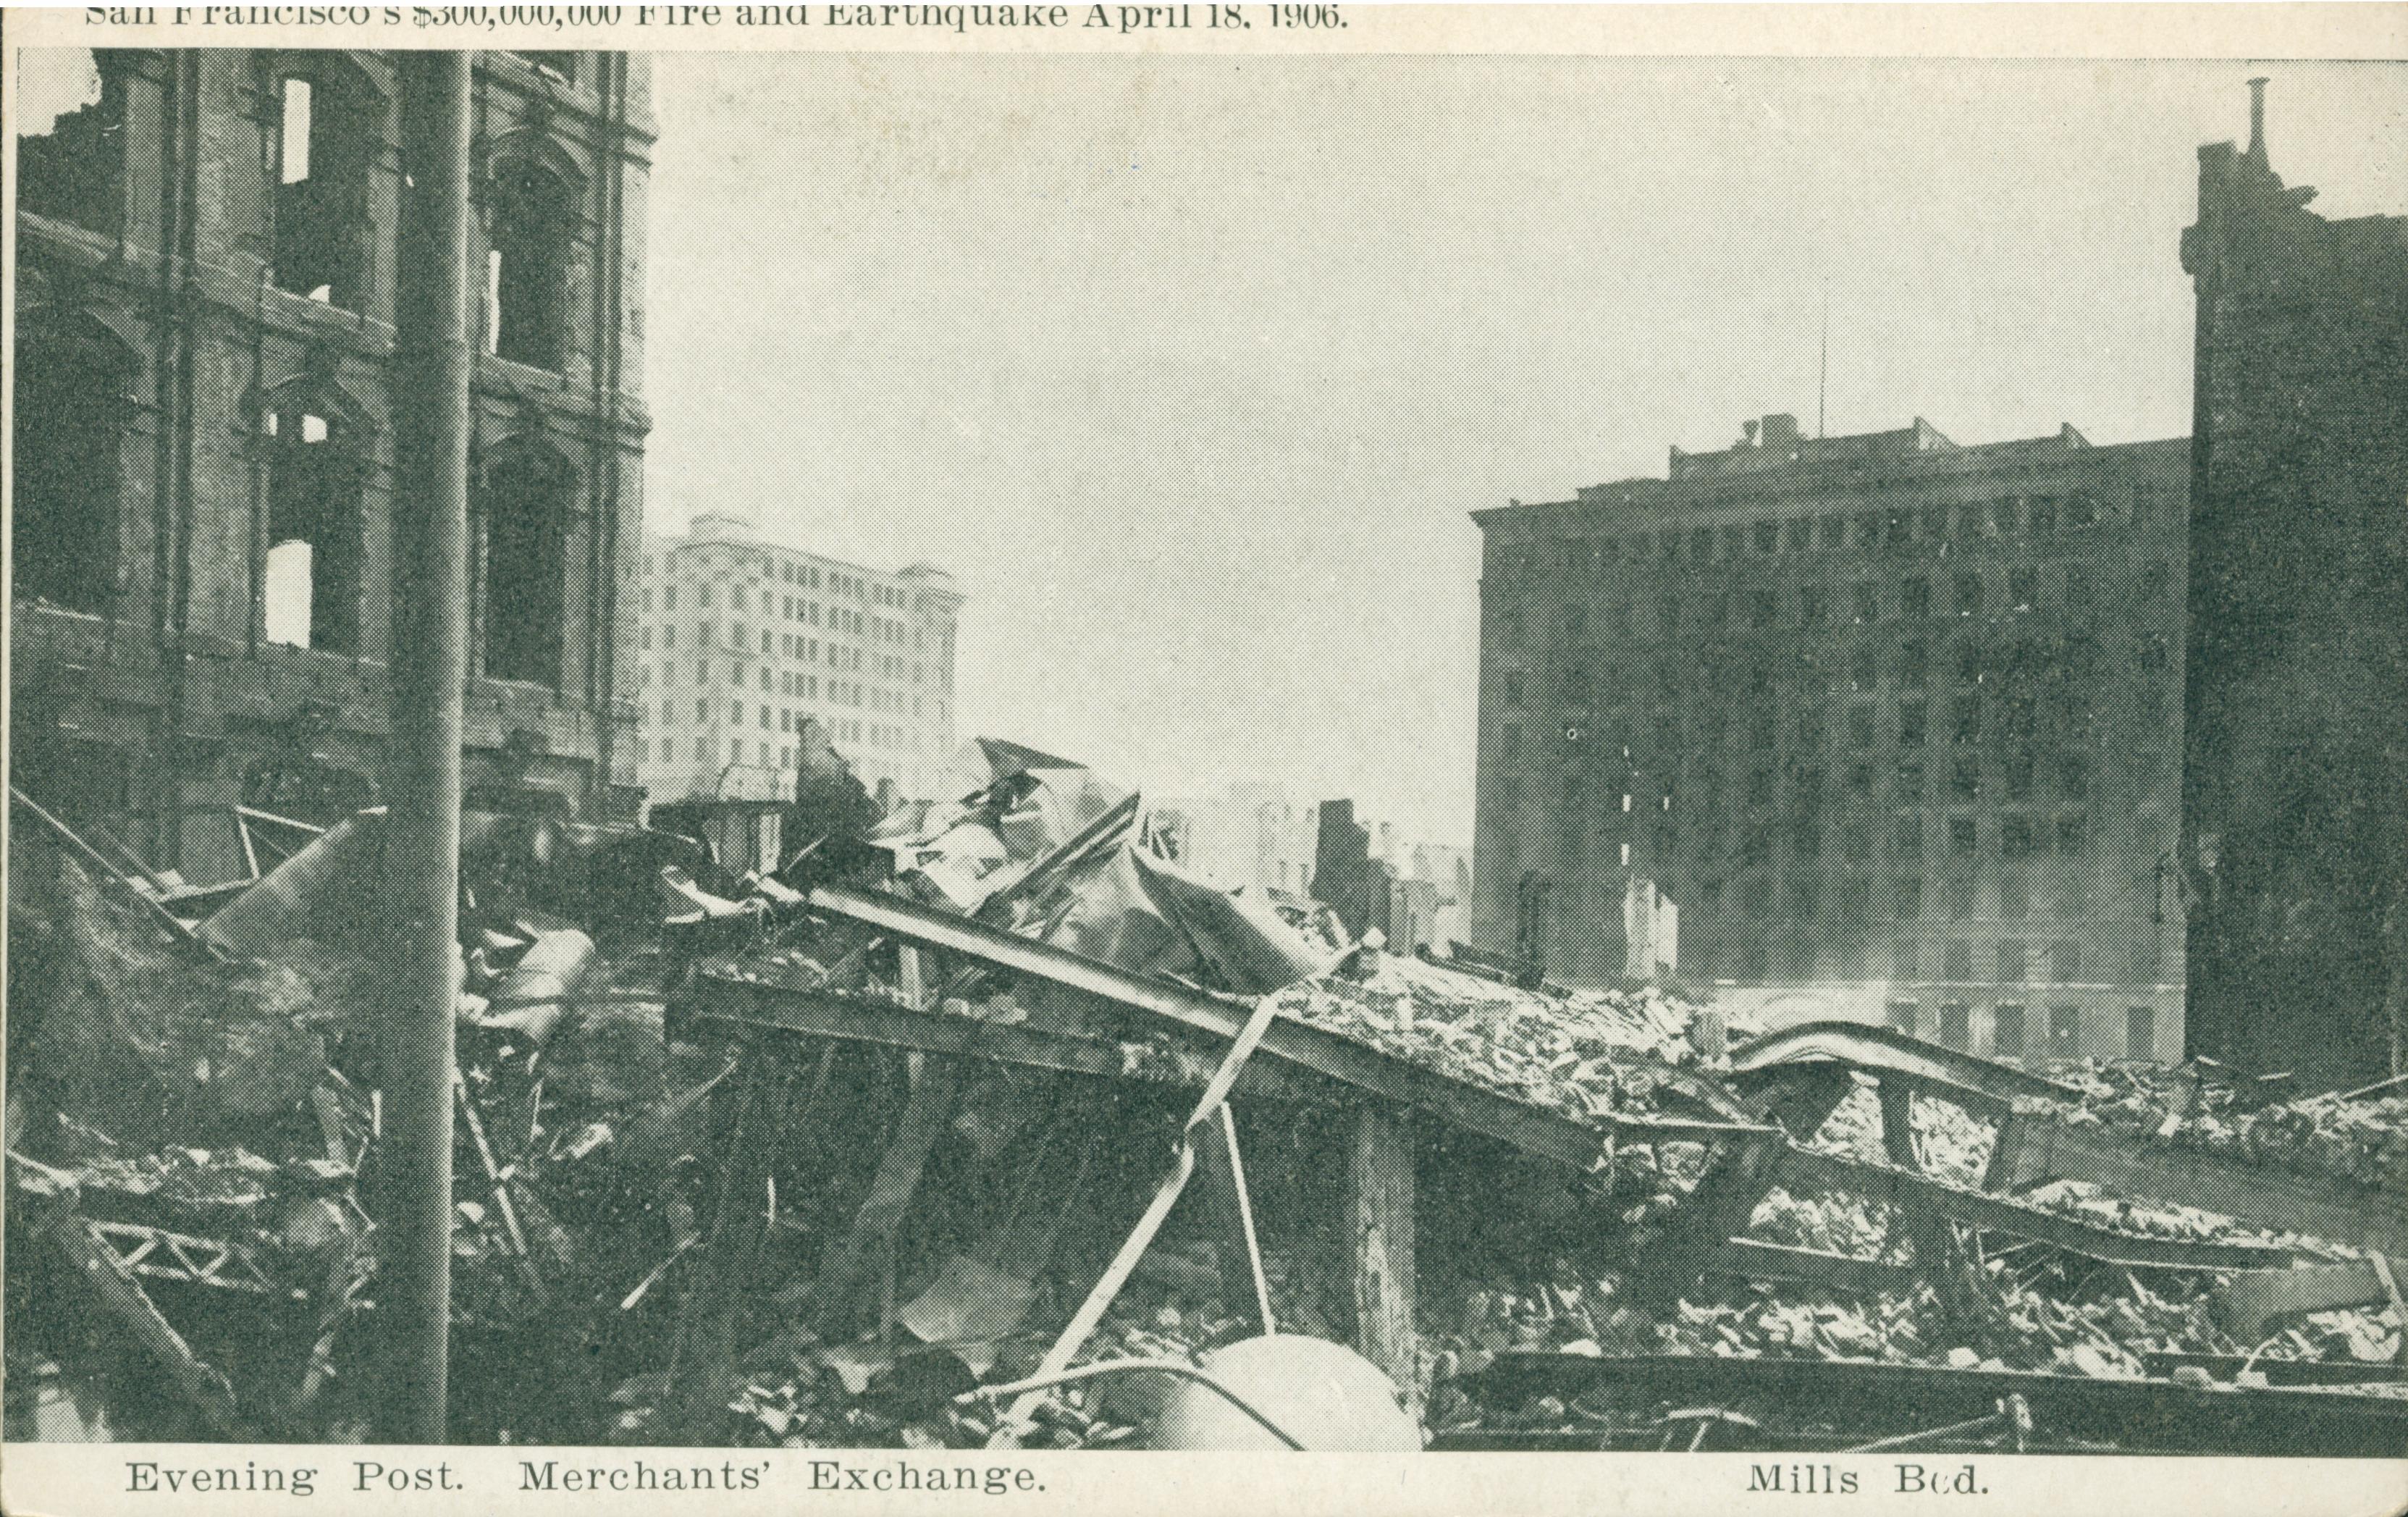 Shows piles of rumble and collapsed buildings.